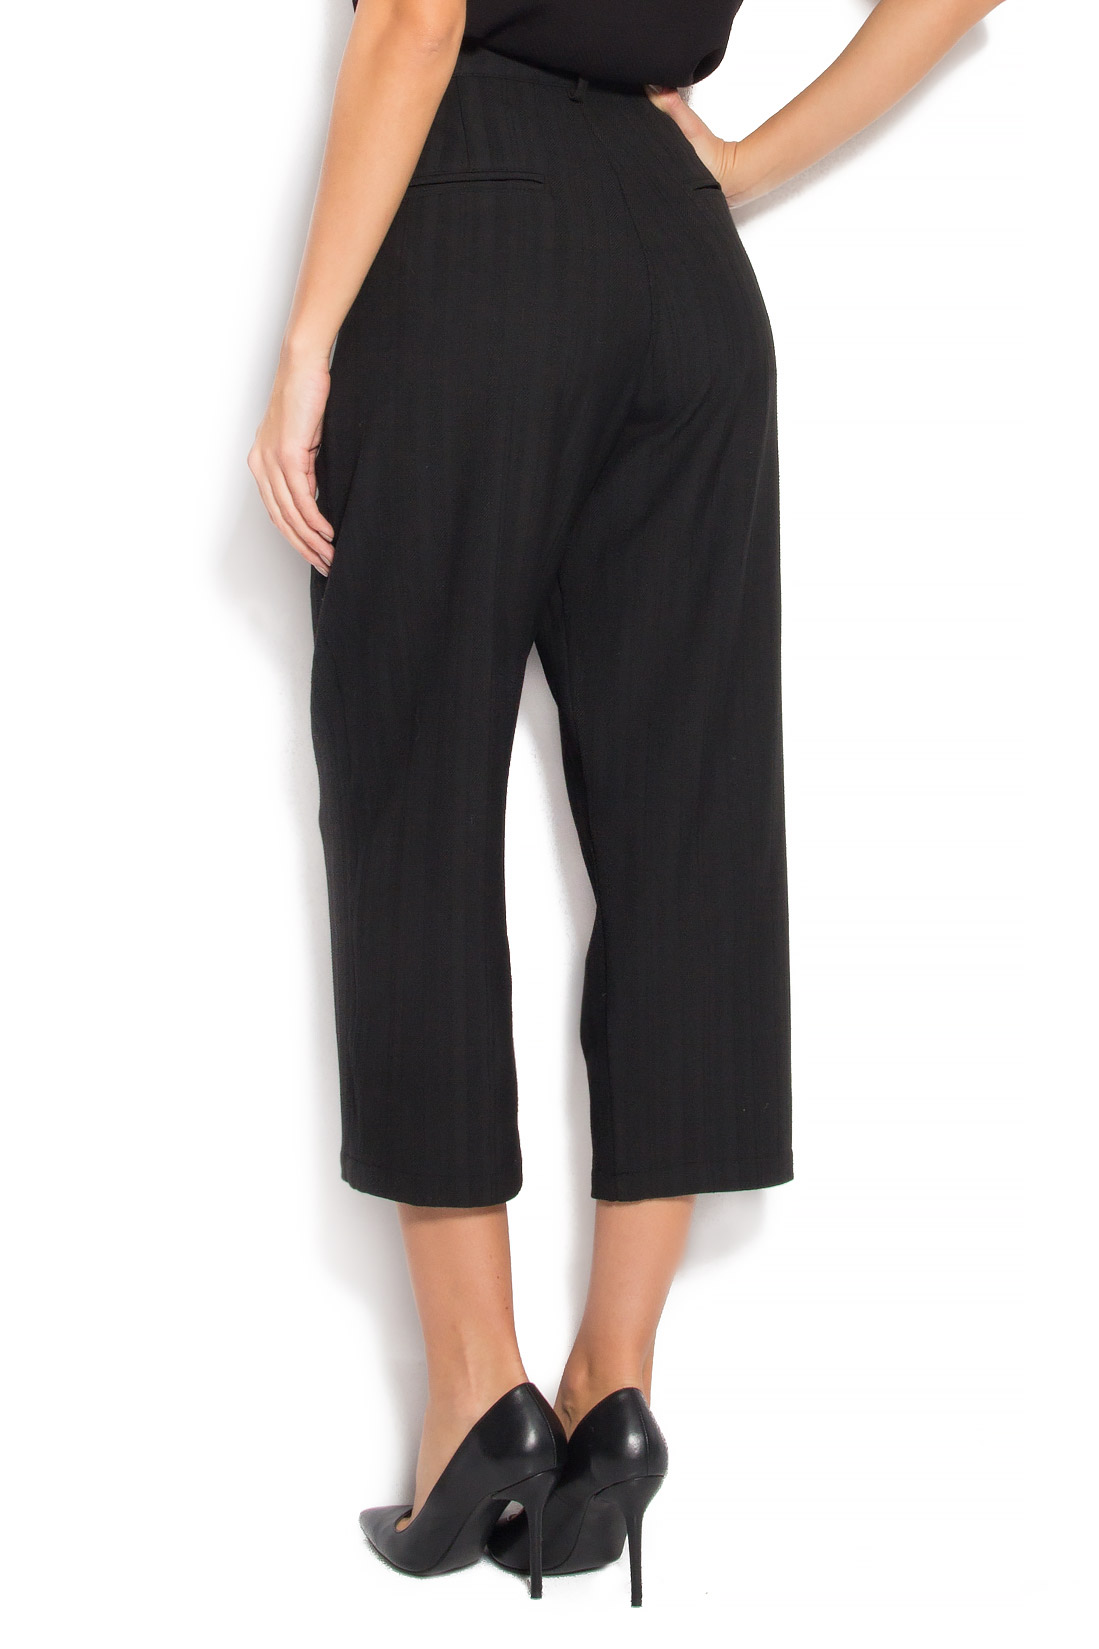 'Collected Trousers' wool-blend wide-leg culottes Studio Cabal image 2